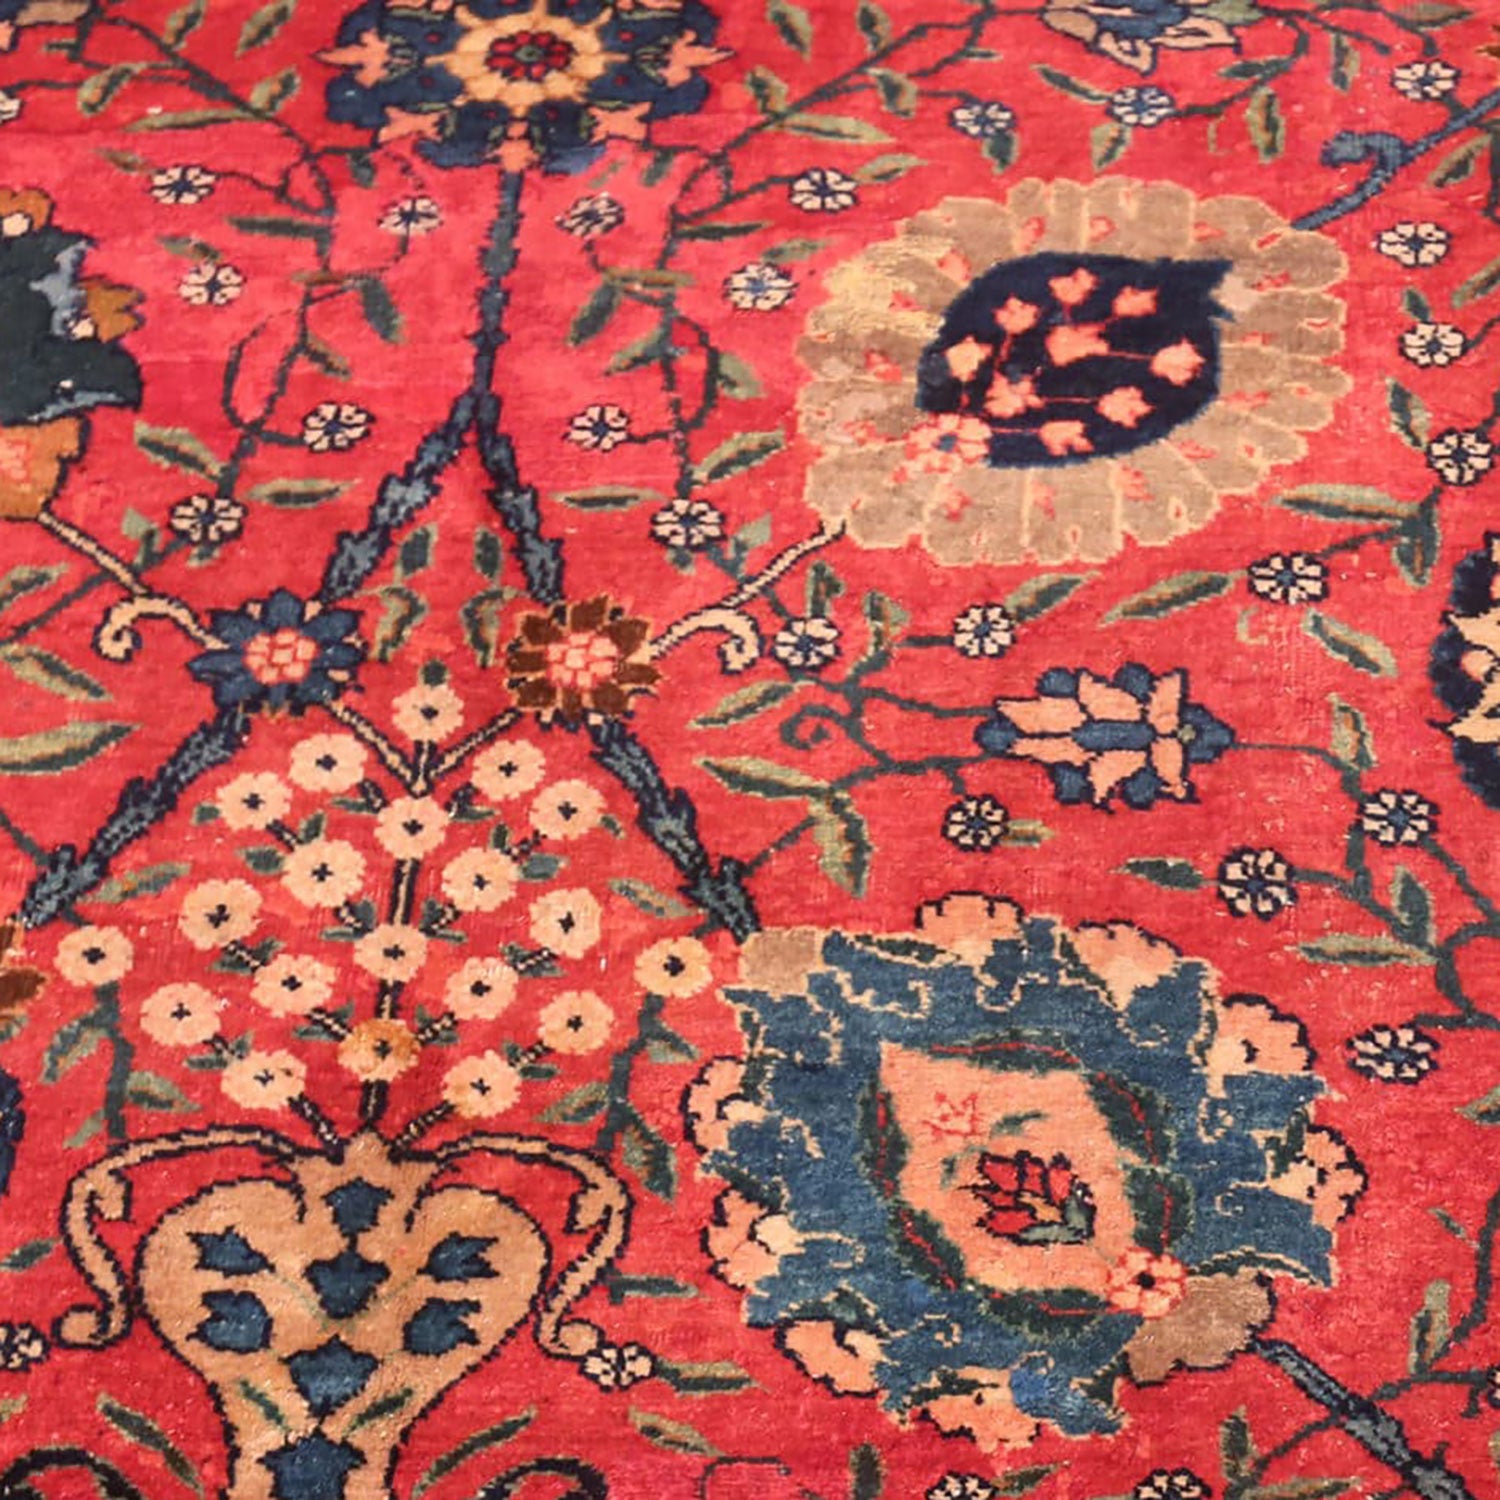 Intricate traditional floral rug with vibrant colors and timeless design.